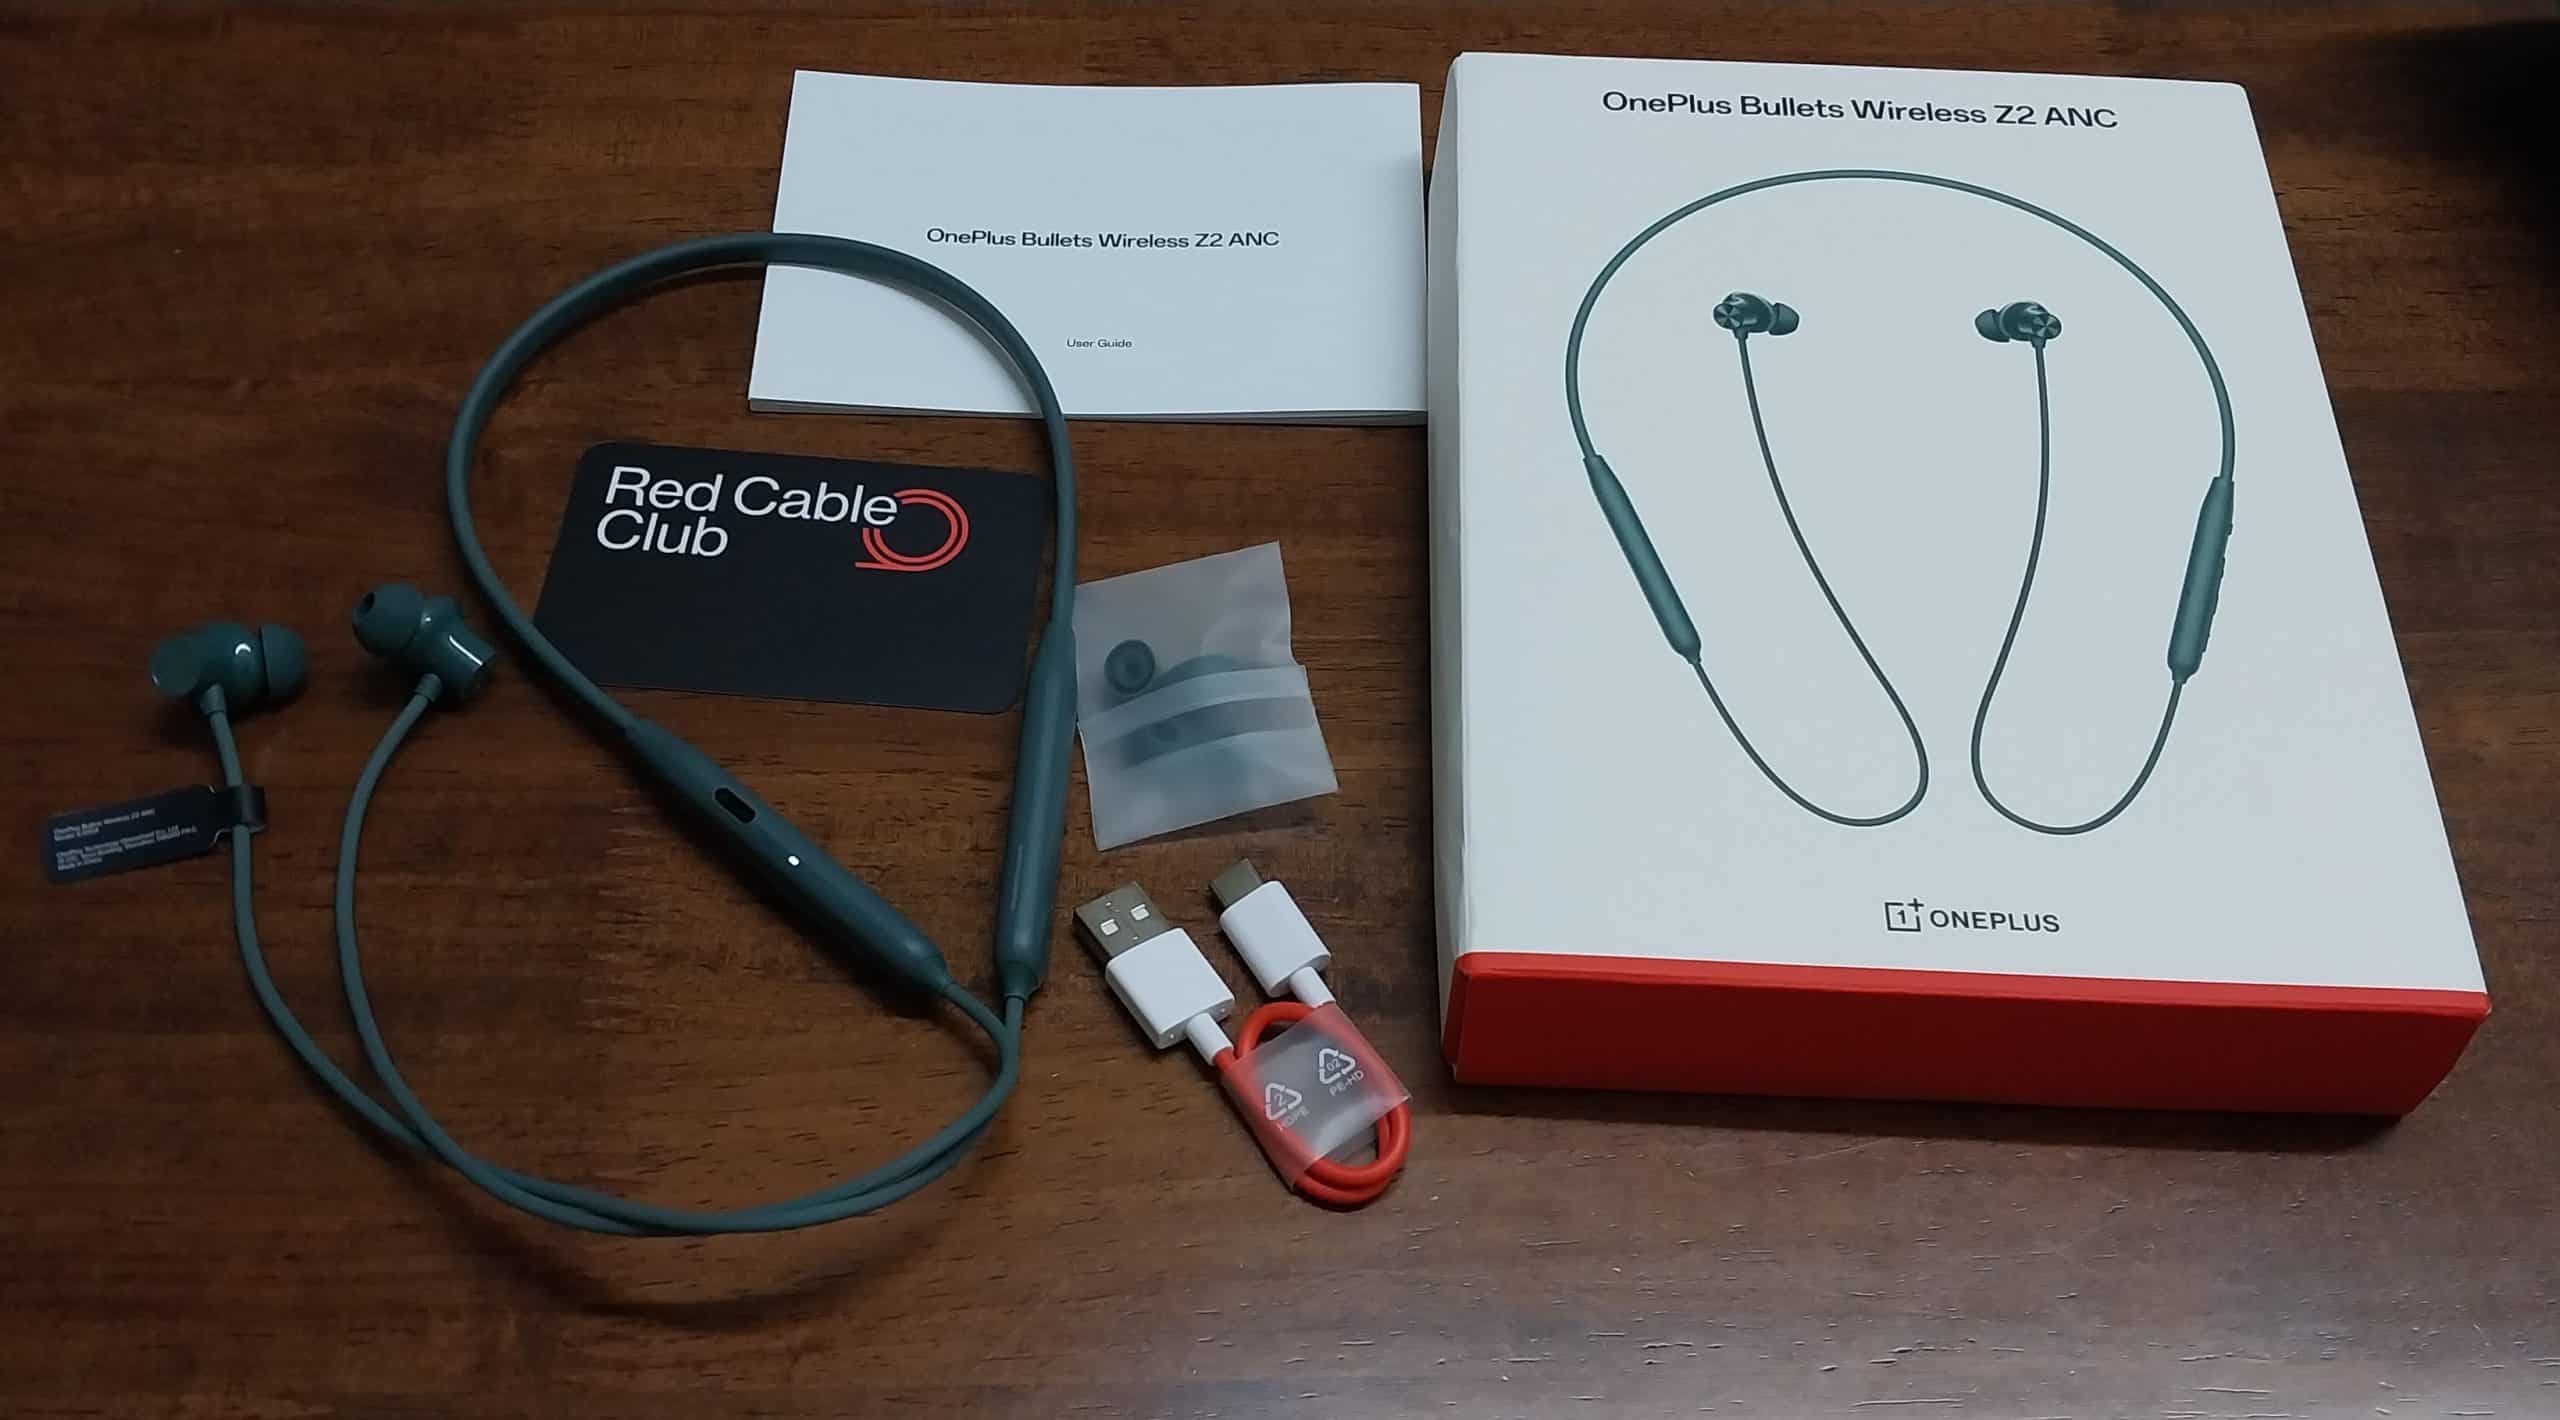 OnePlus Bullets Wireless Z2 ANC - Sound Quality and ANC